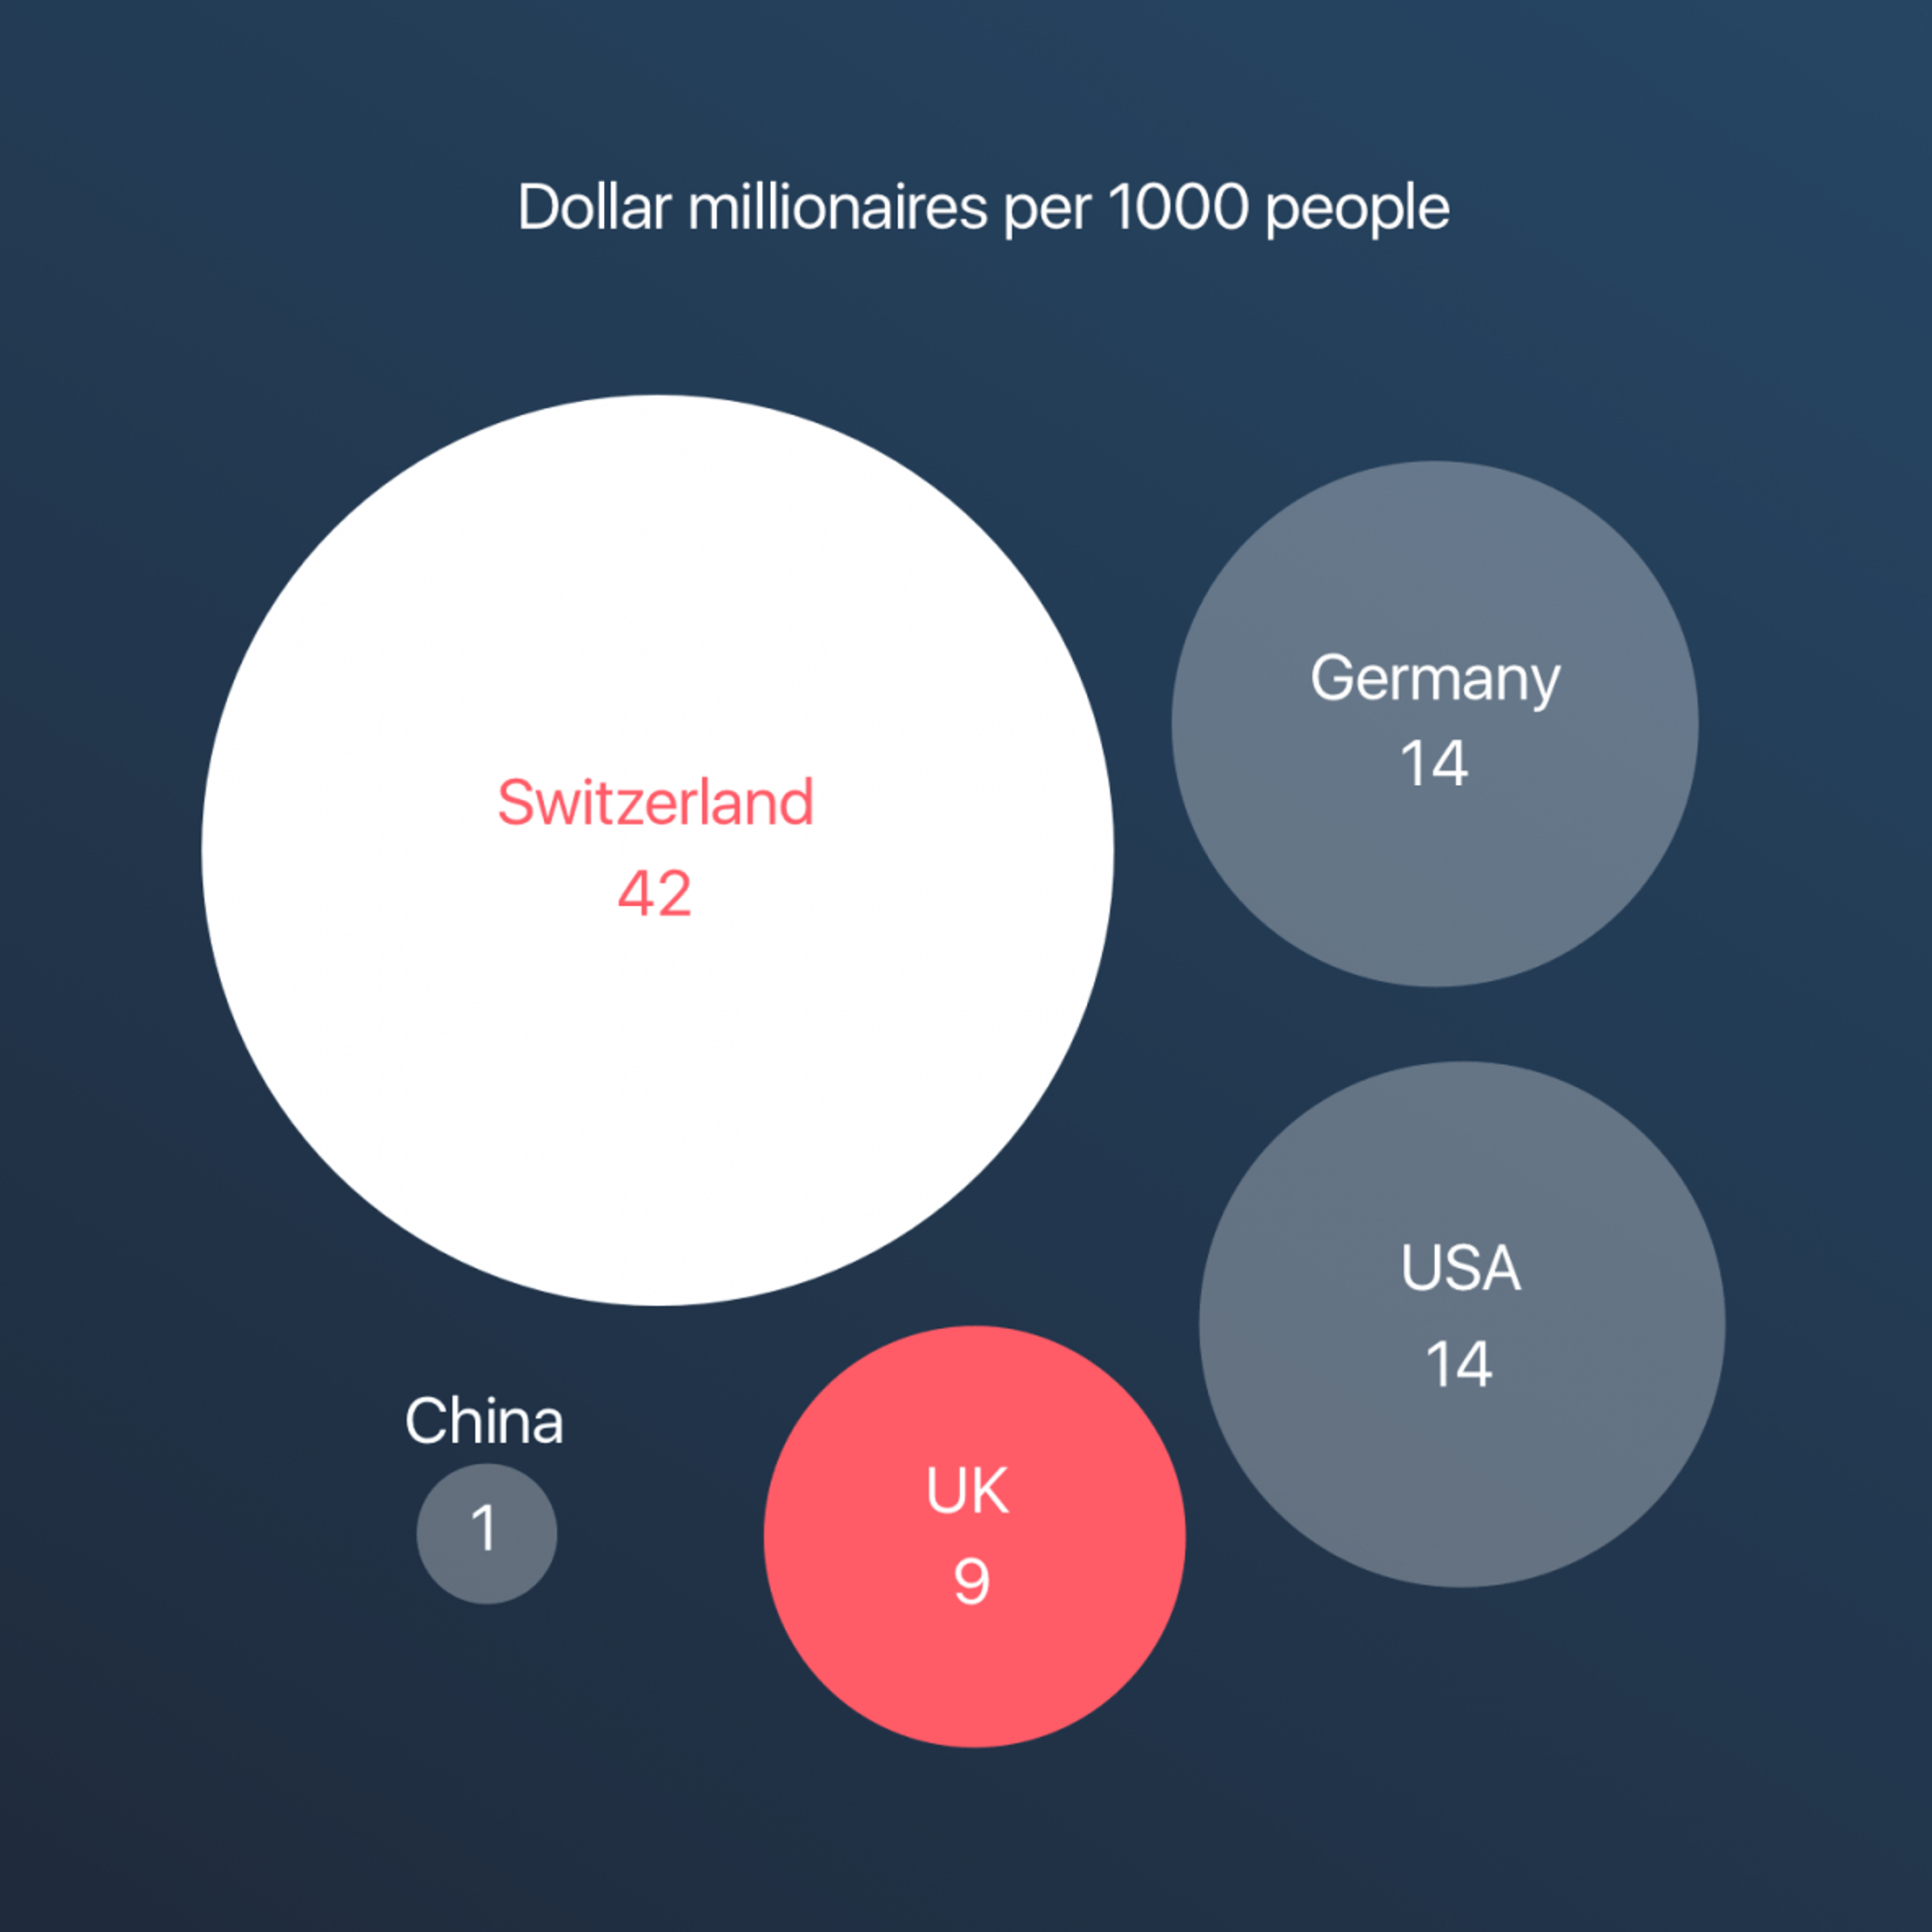 A visual showing the dollar millionaires per 1000 people in different countries. Switzerland has the most with 42, then Germany 14, USA 14 and the UK with 9.